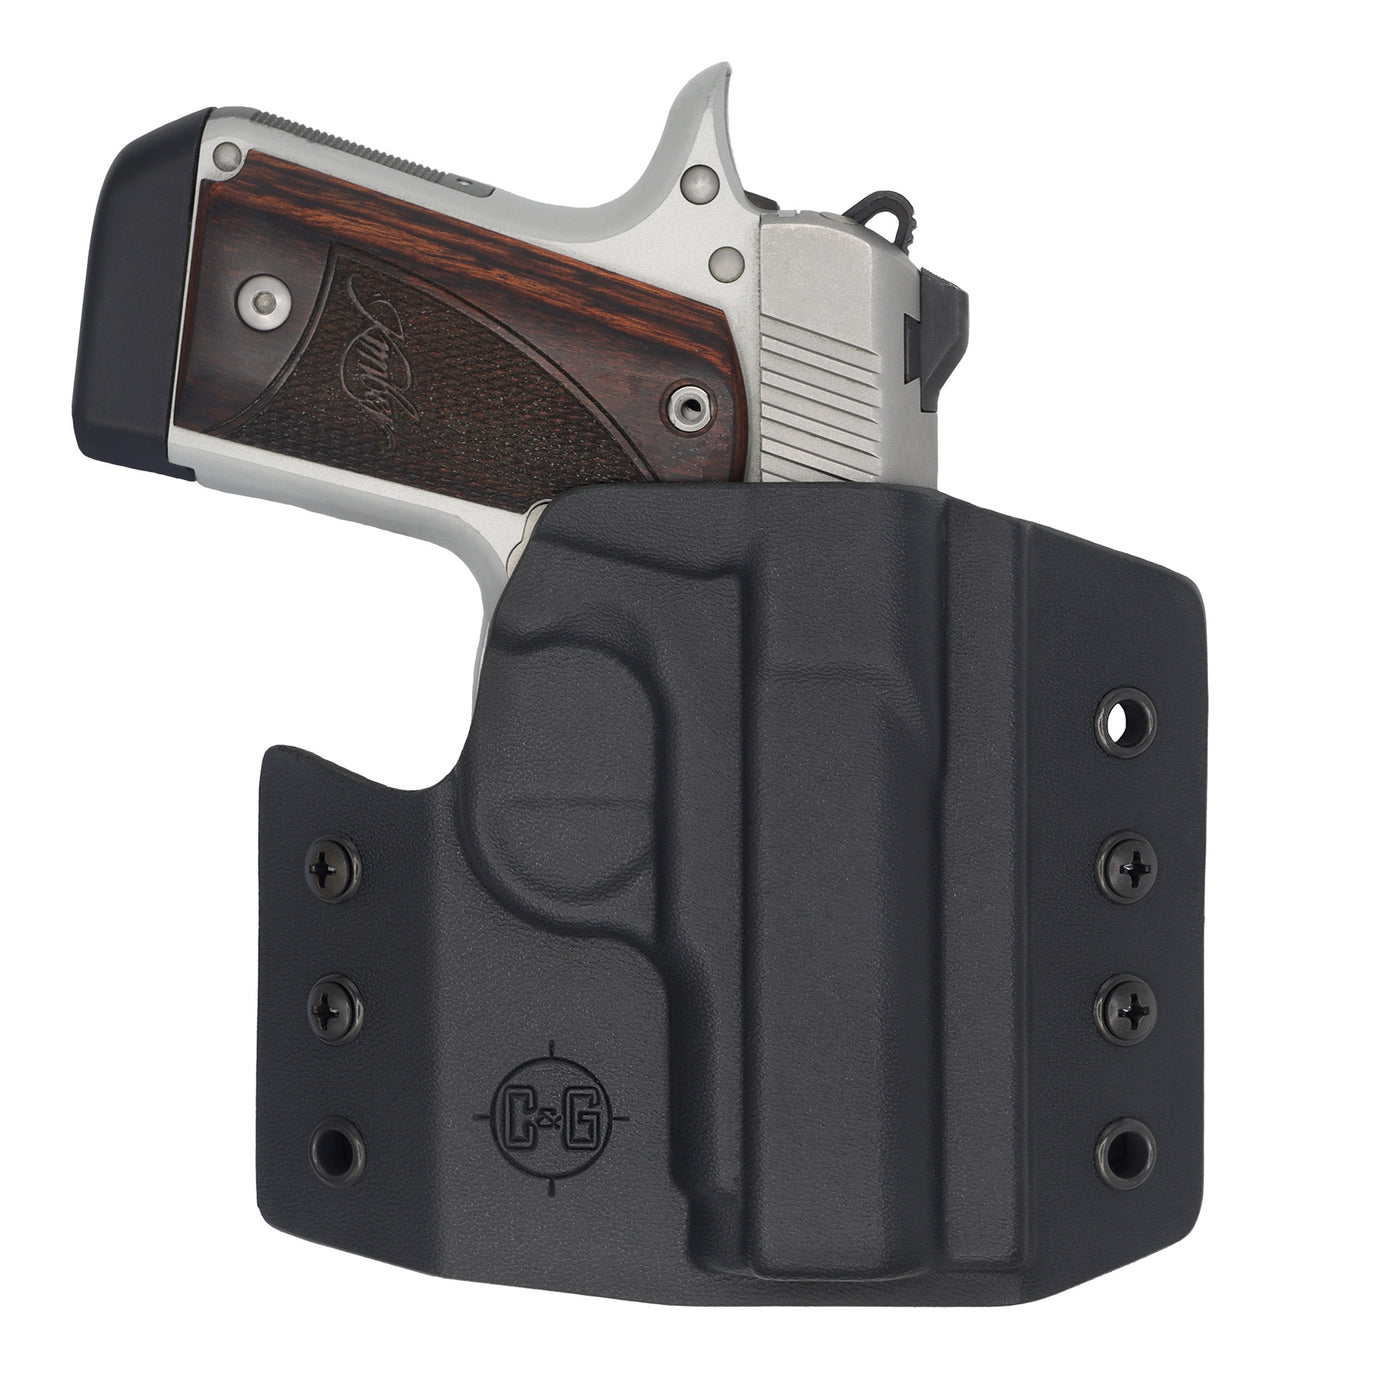 C&G Holsters OWB Outside the waistband Holster for the Kimber Micro 9